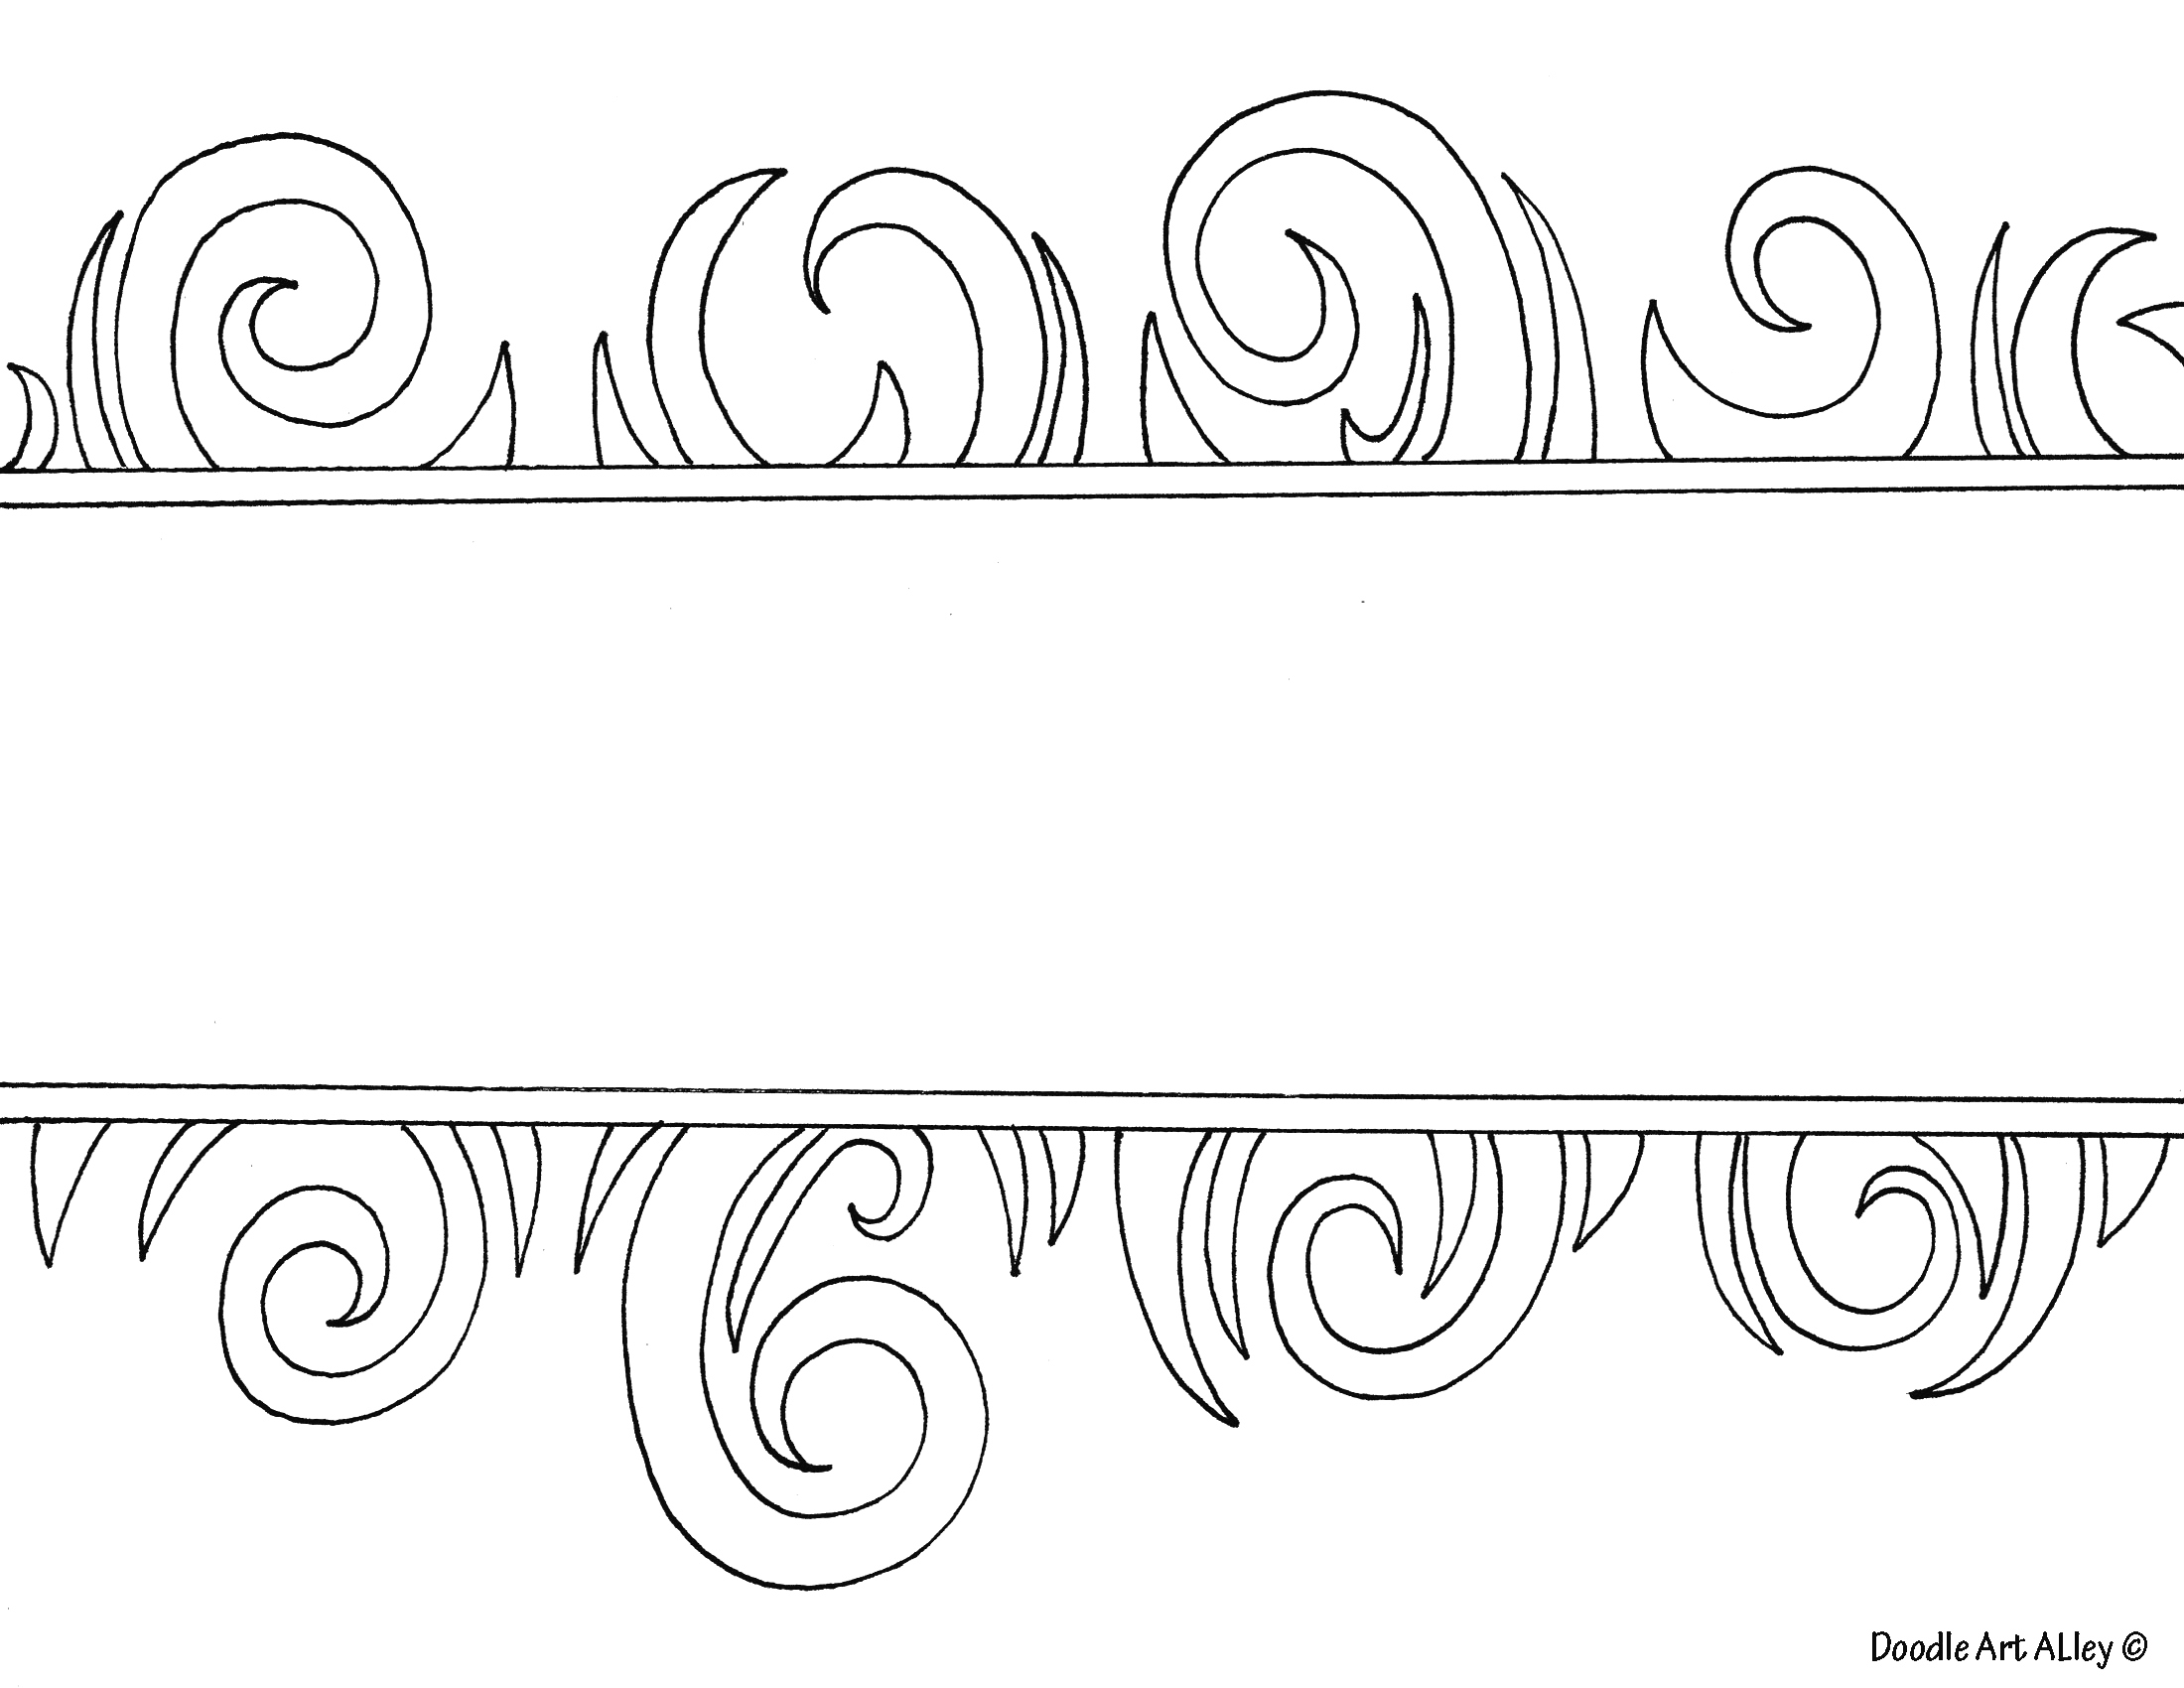 Name Coloring Page Willpower Name Coloring Pages Temporre Graff 21027 Learnmorecolors